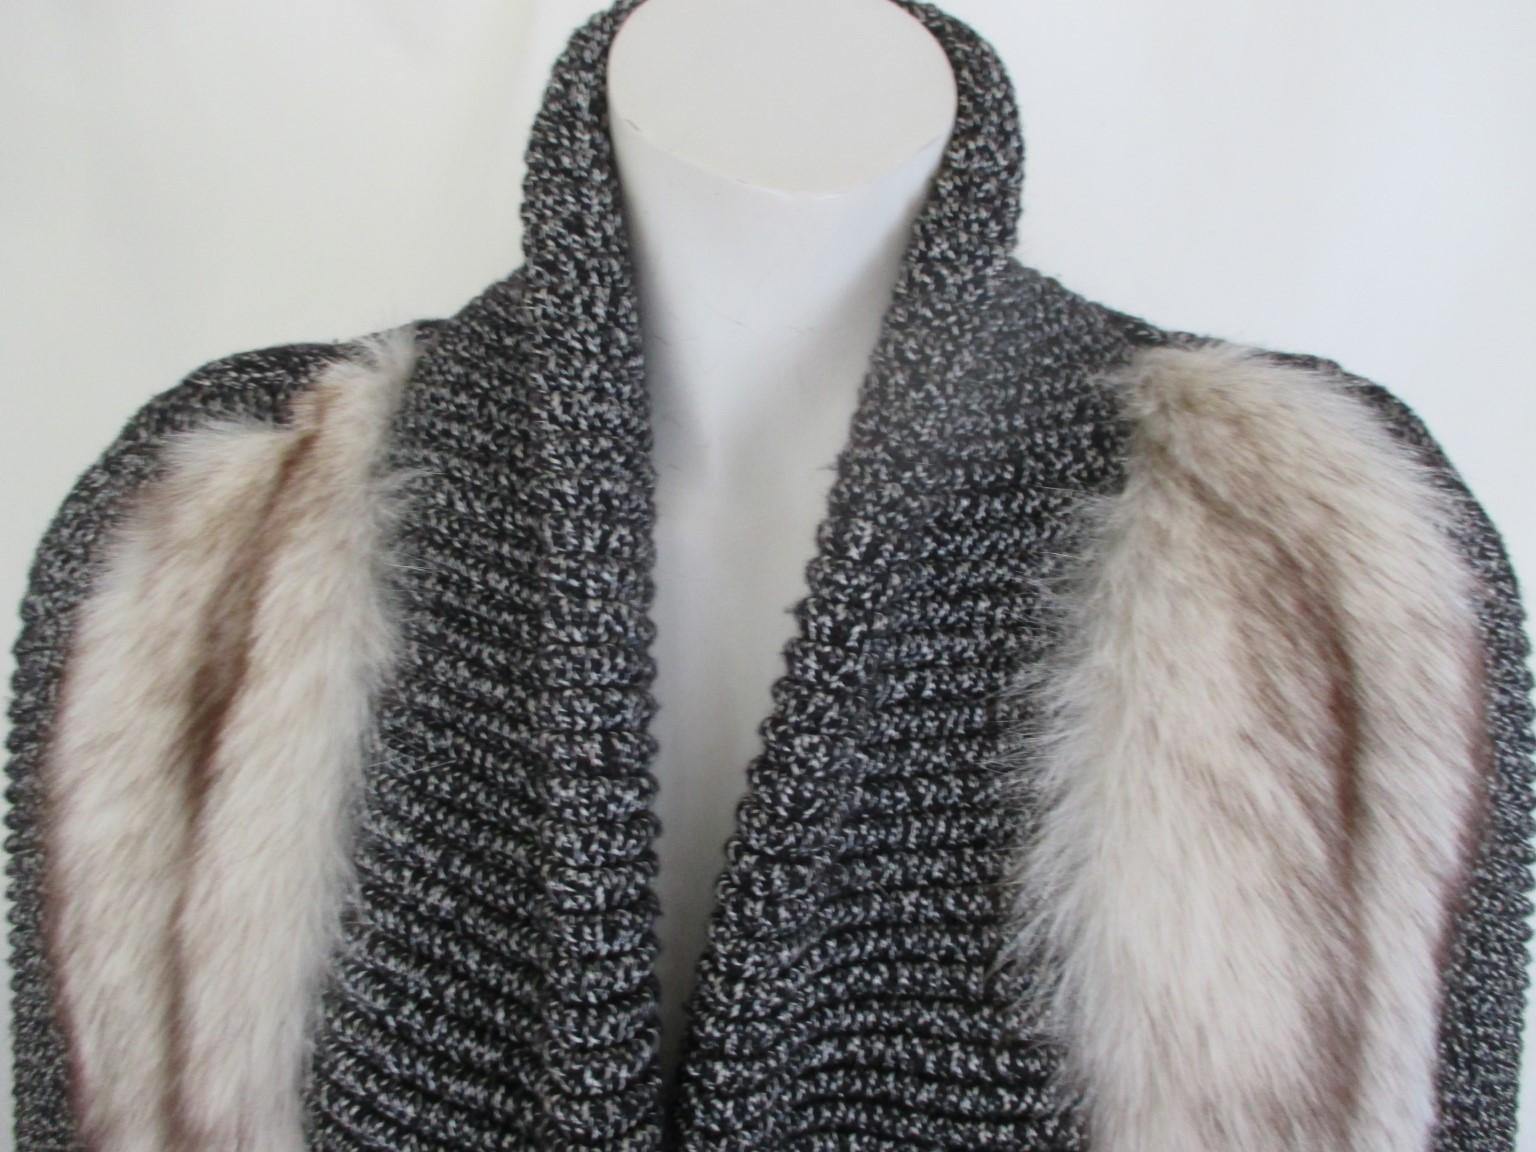 Fabulous original vintage 80/90s grey wool coat with fox fur

We offer more exclusive fur items, view our frontstore

Details:
Black and white blend knitted wool with white fox fur
1 loose button and 2 pockets.
Fully lined
Pre owned
Size fits as